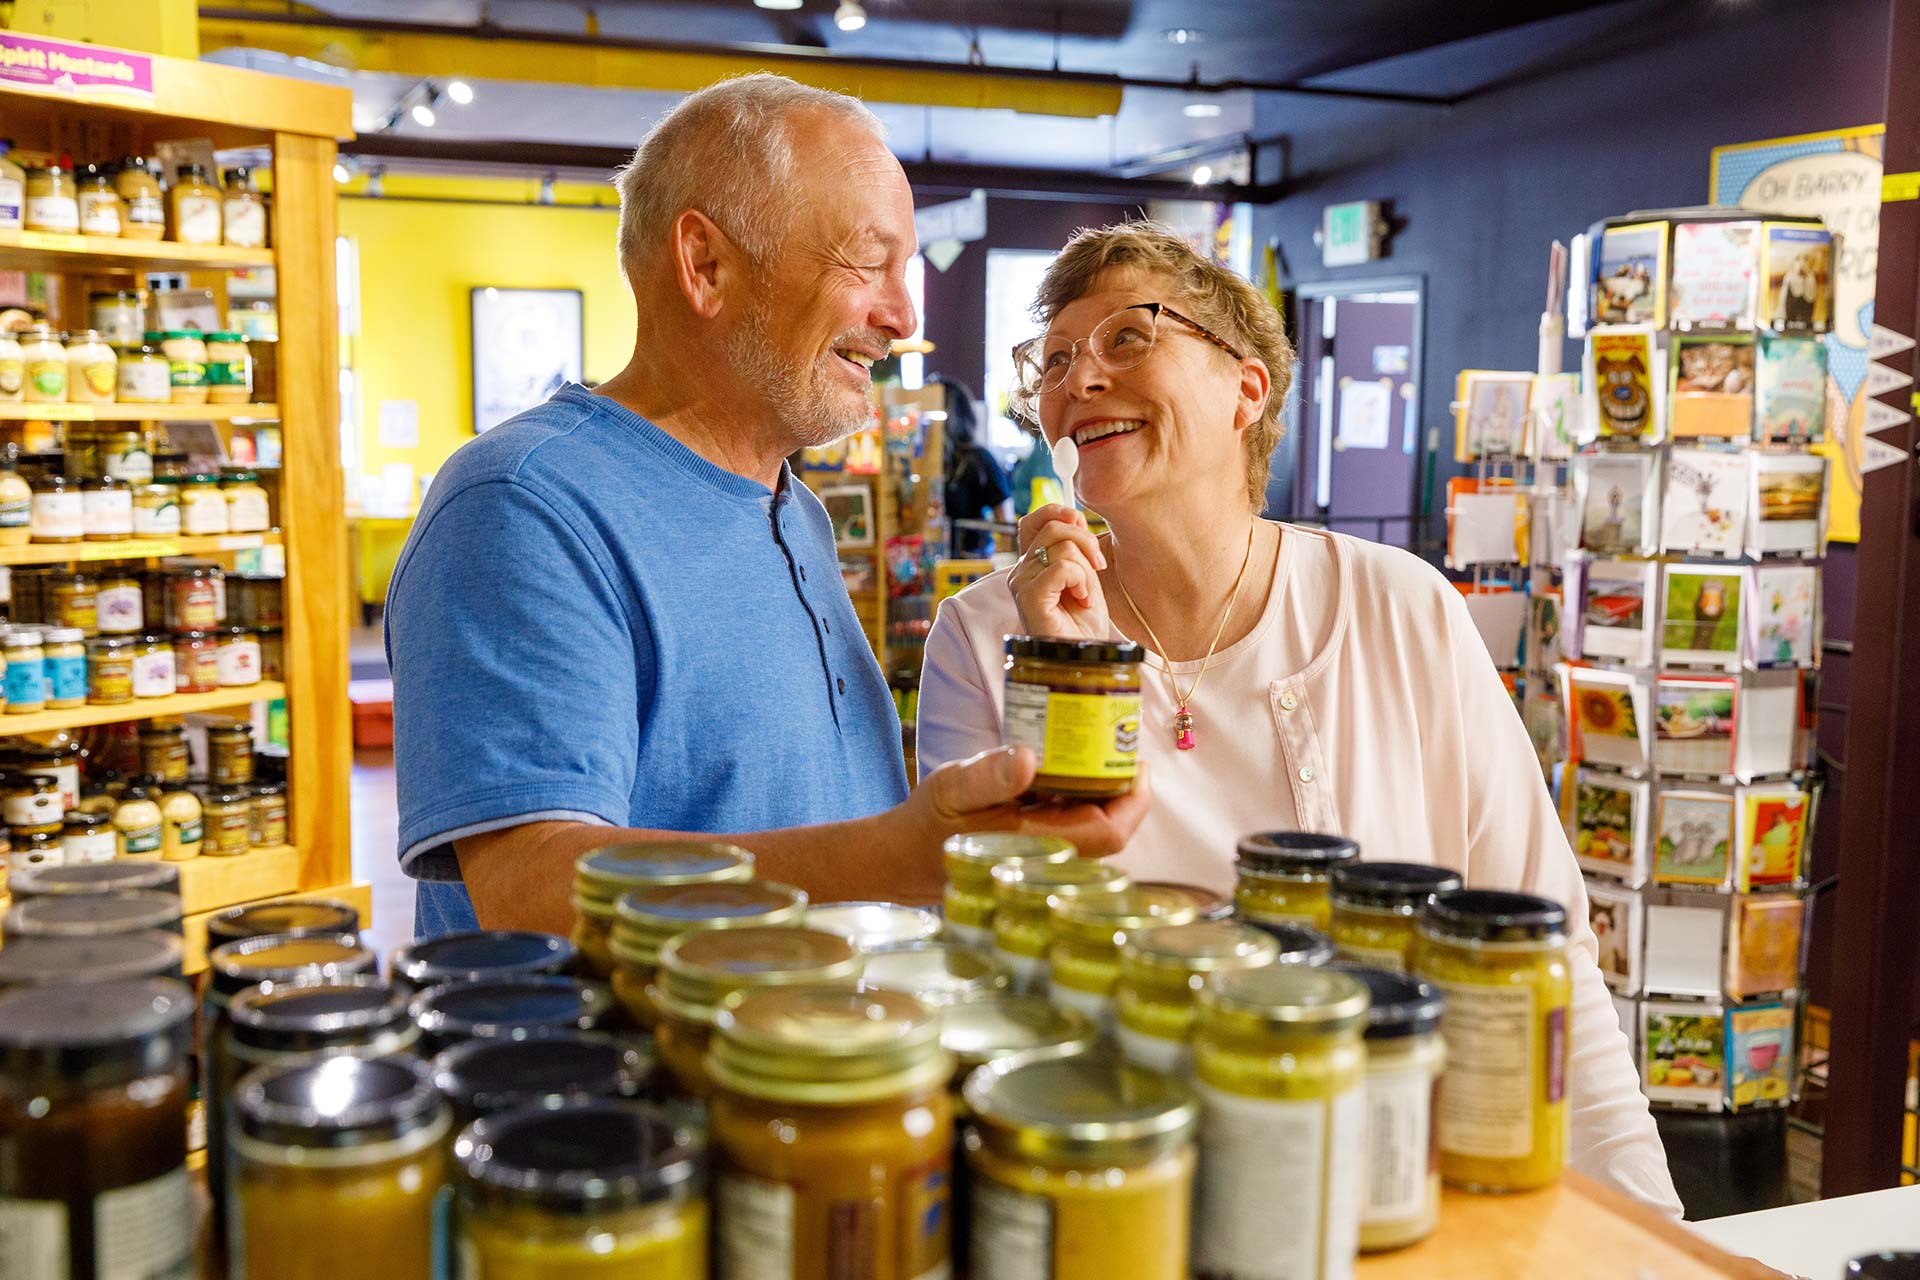 a man and woman standing in front of jars of food